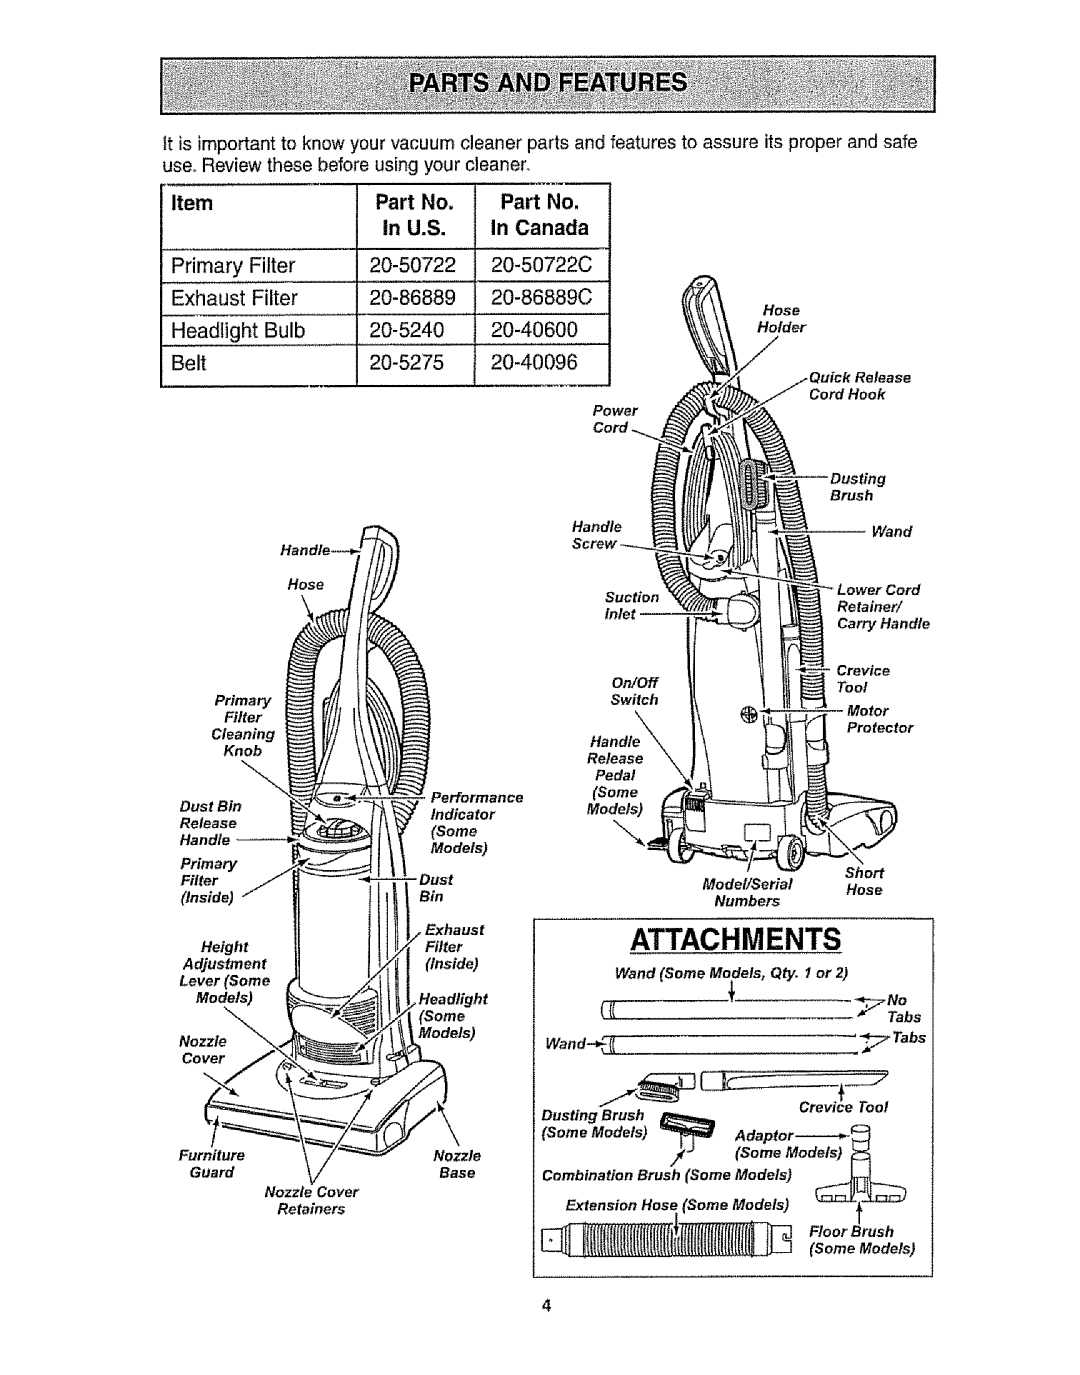 Kenmore 116.31721 owner manual Attachments, In U.S, Wand, tabs 